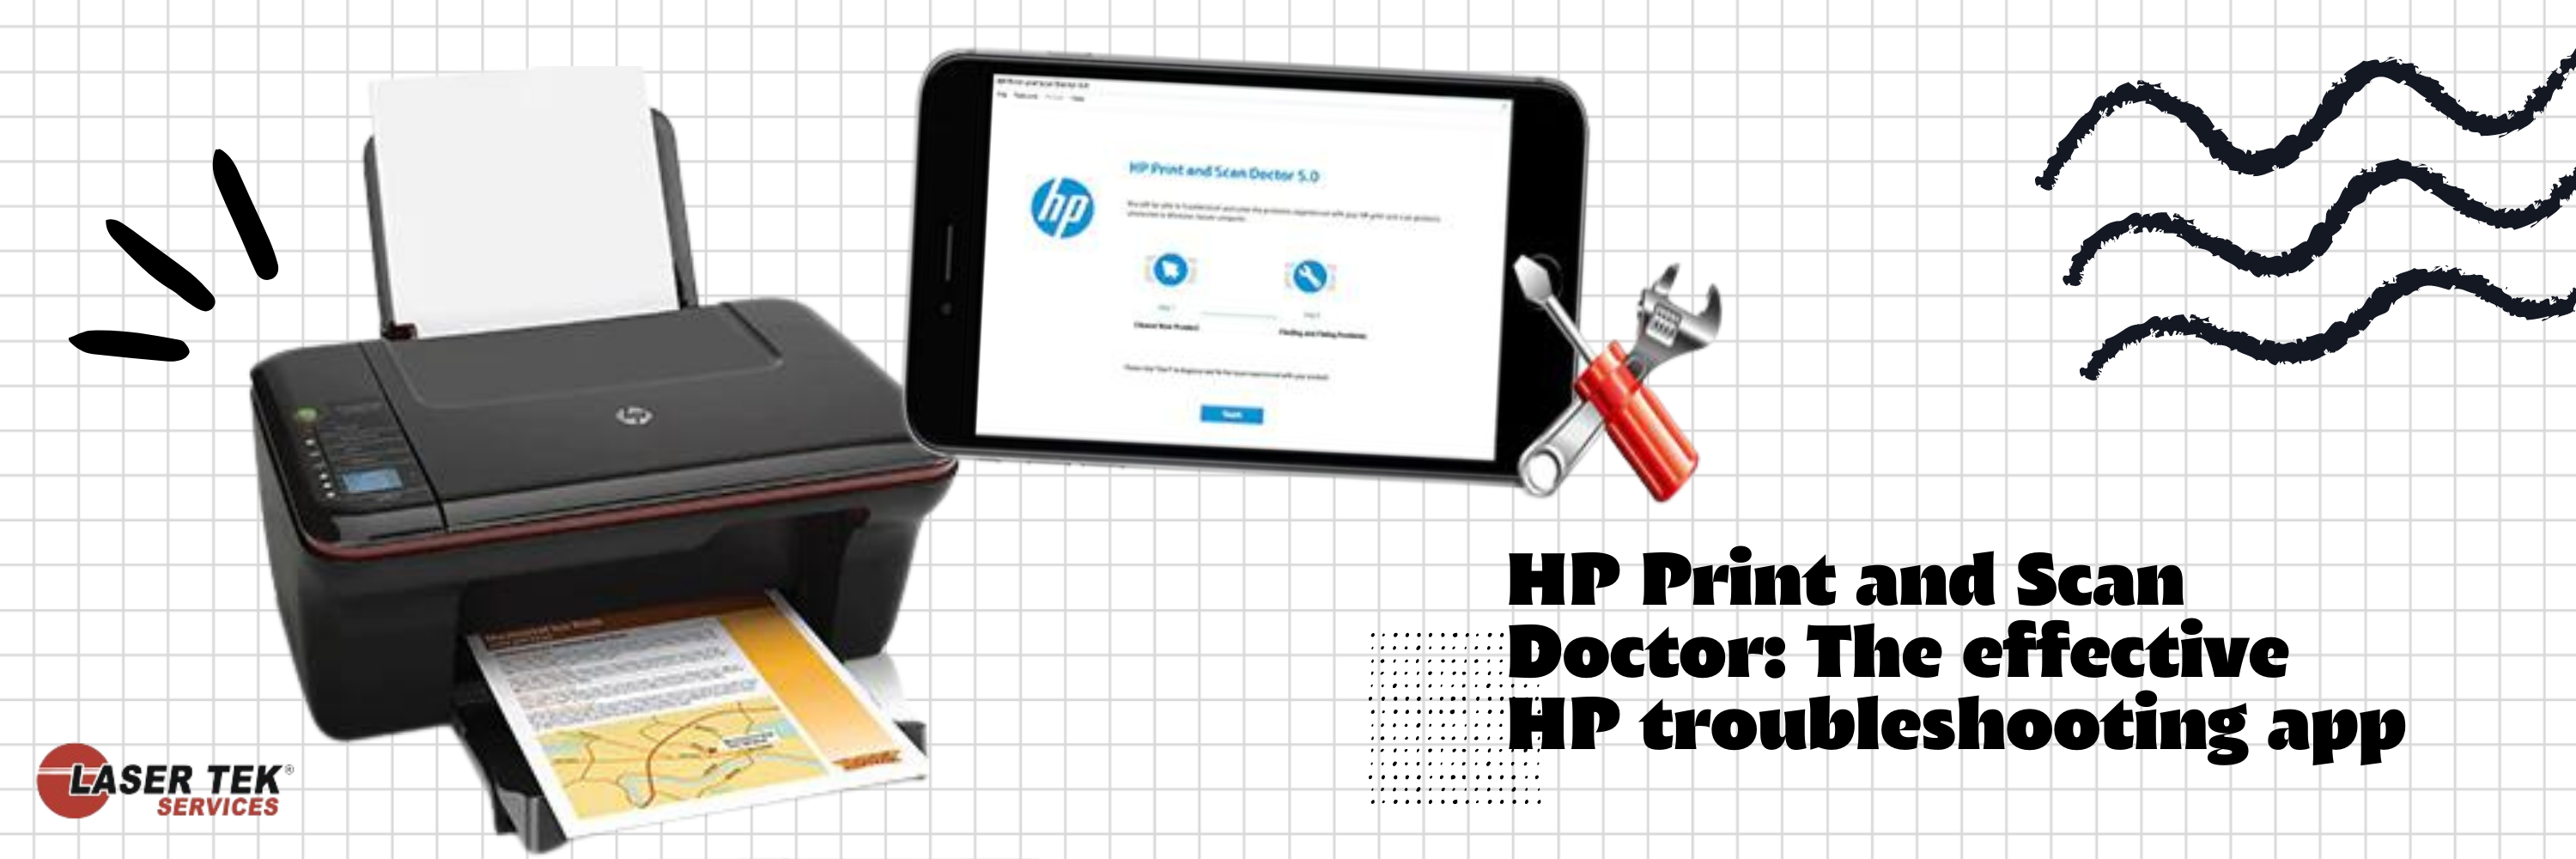 HP Print and Doctor: The effective HP troubleshooting app – Laser Tek Services